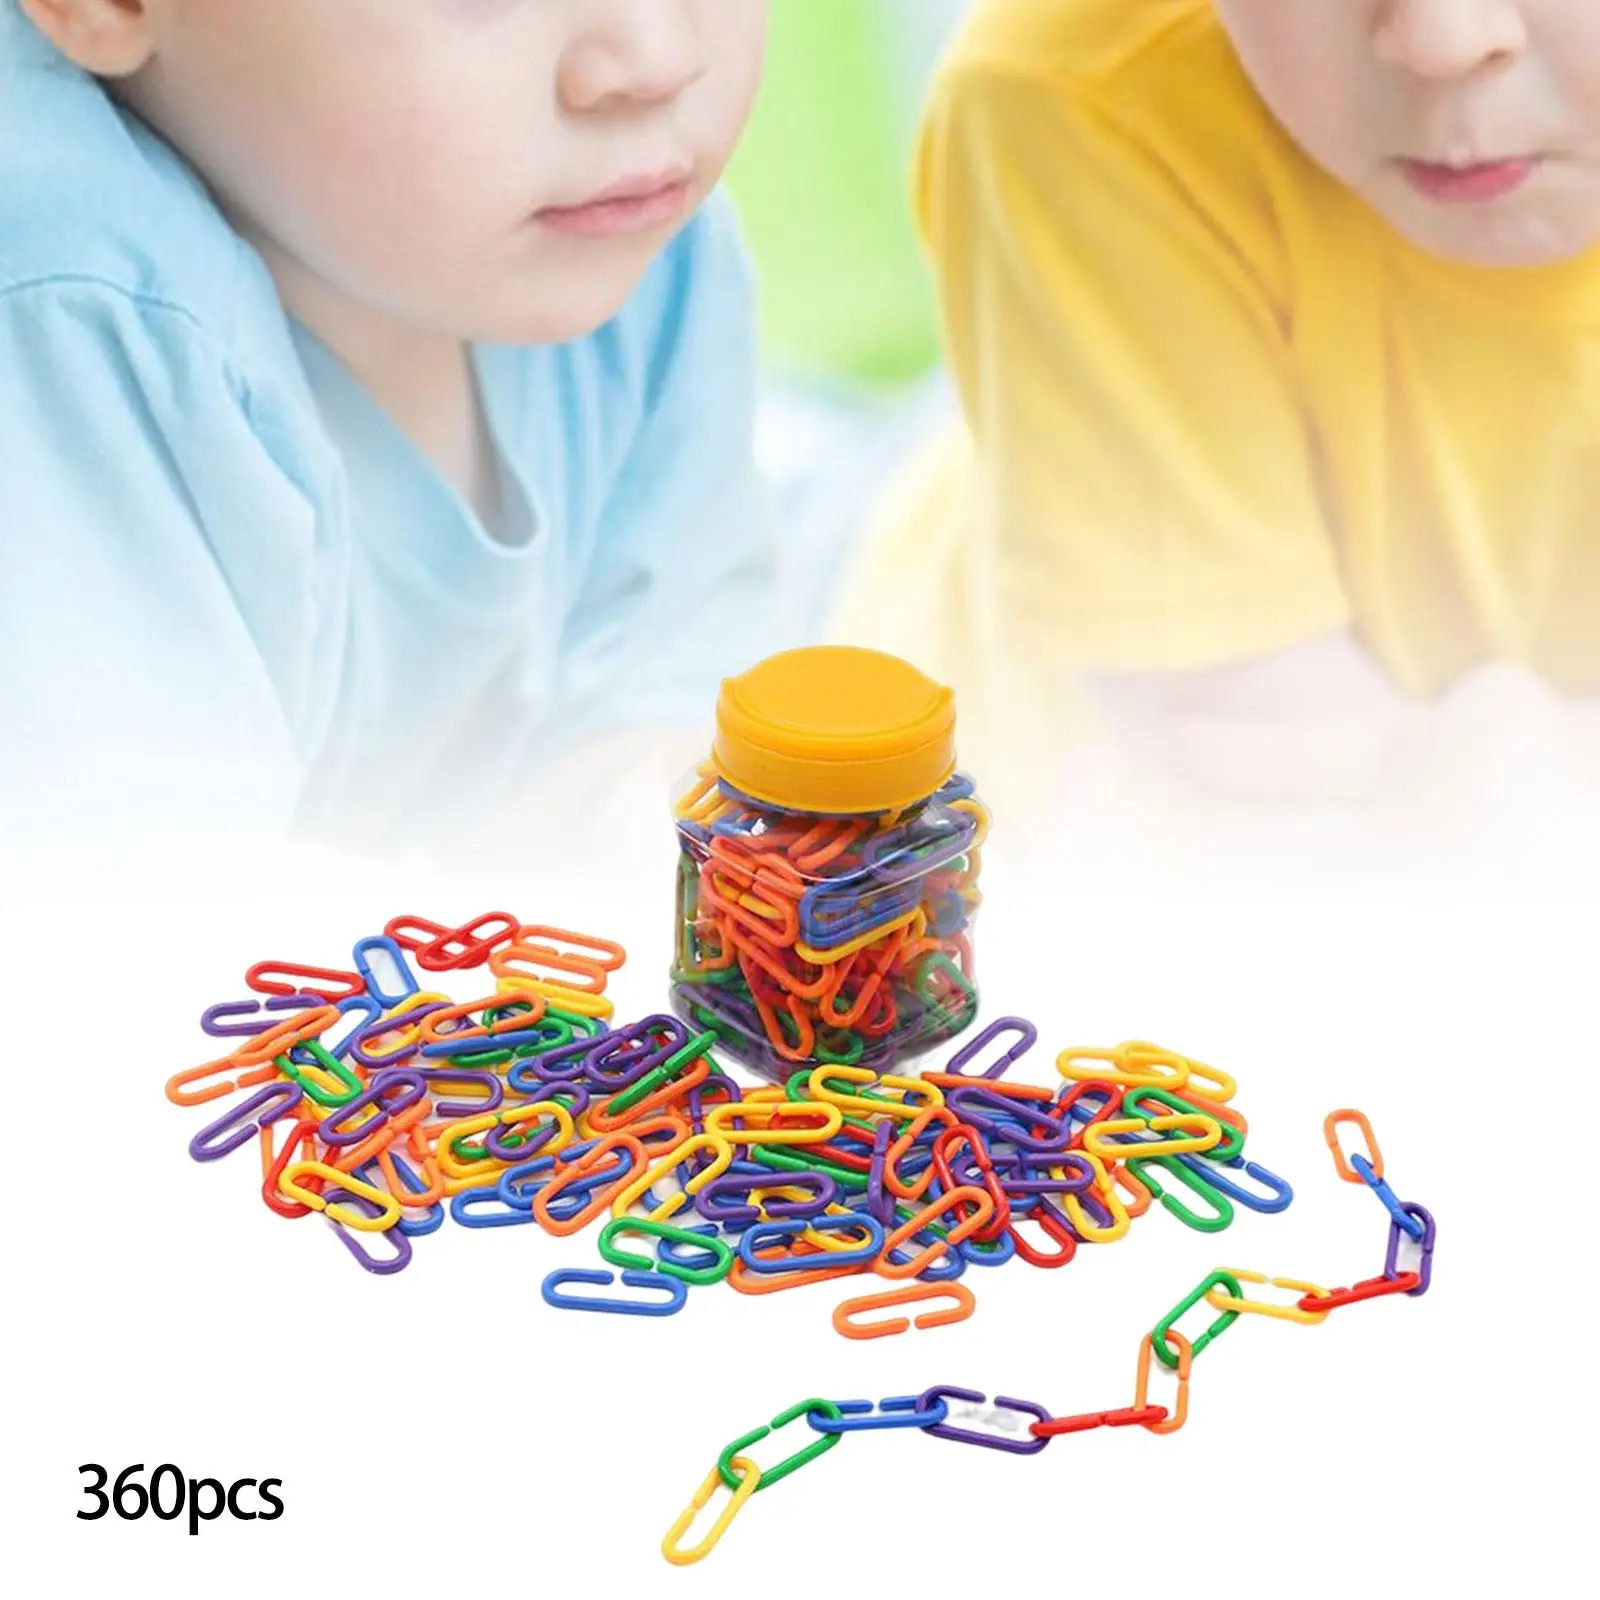 360Pcs Rainbow Color Hook Links Connected Buckle Educational Toy